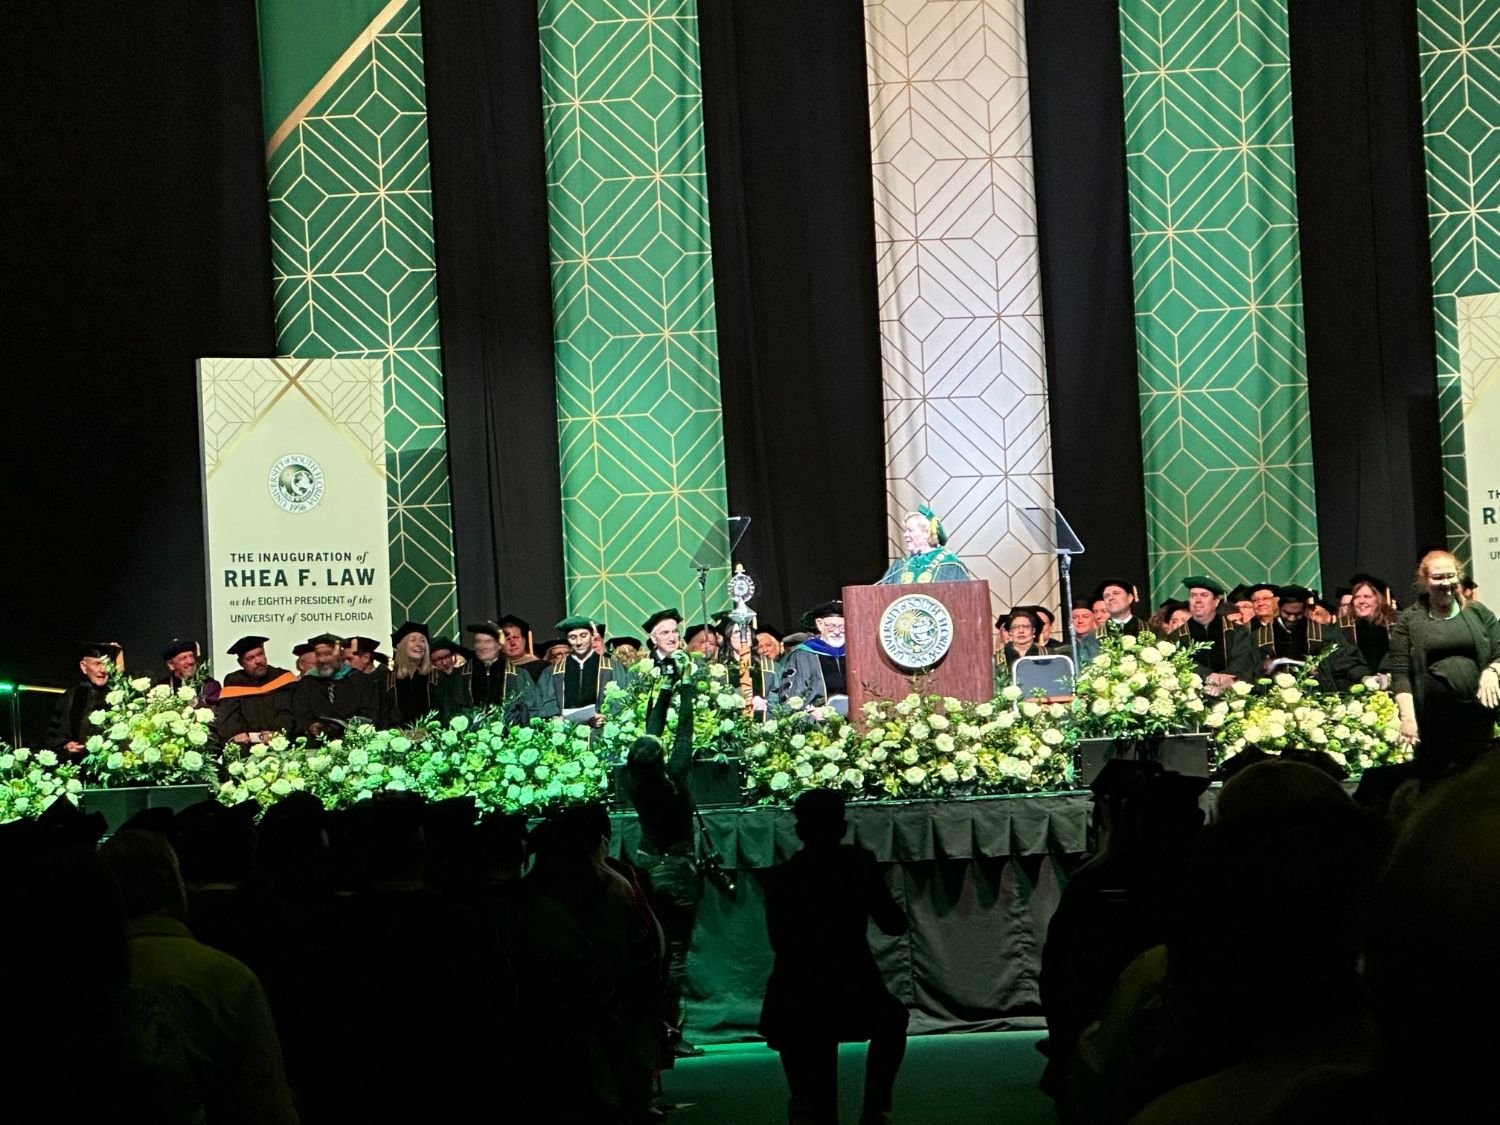 President Rhea Law shares vision for USF’s future in presidential inauguration speech